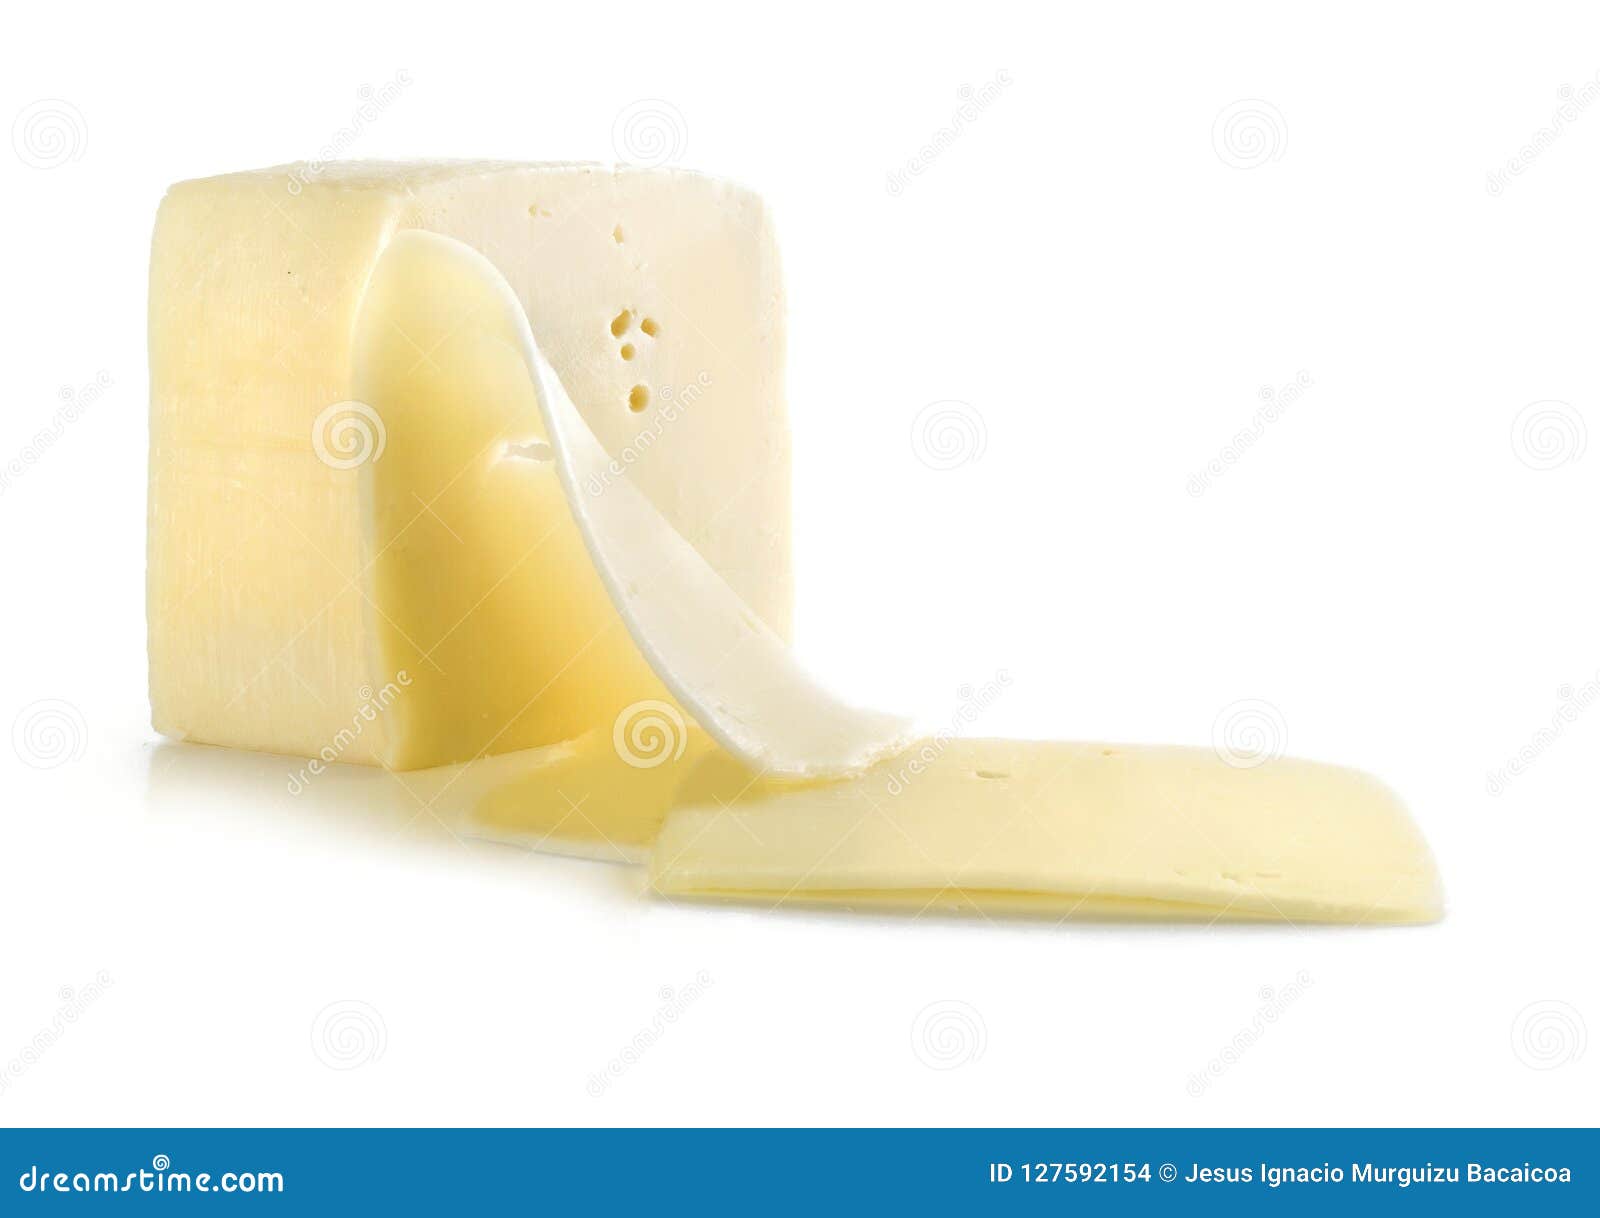 melting cheese and slices cut on a white background